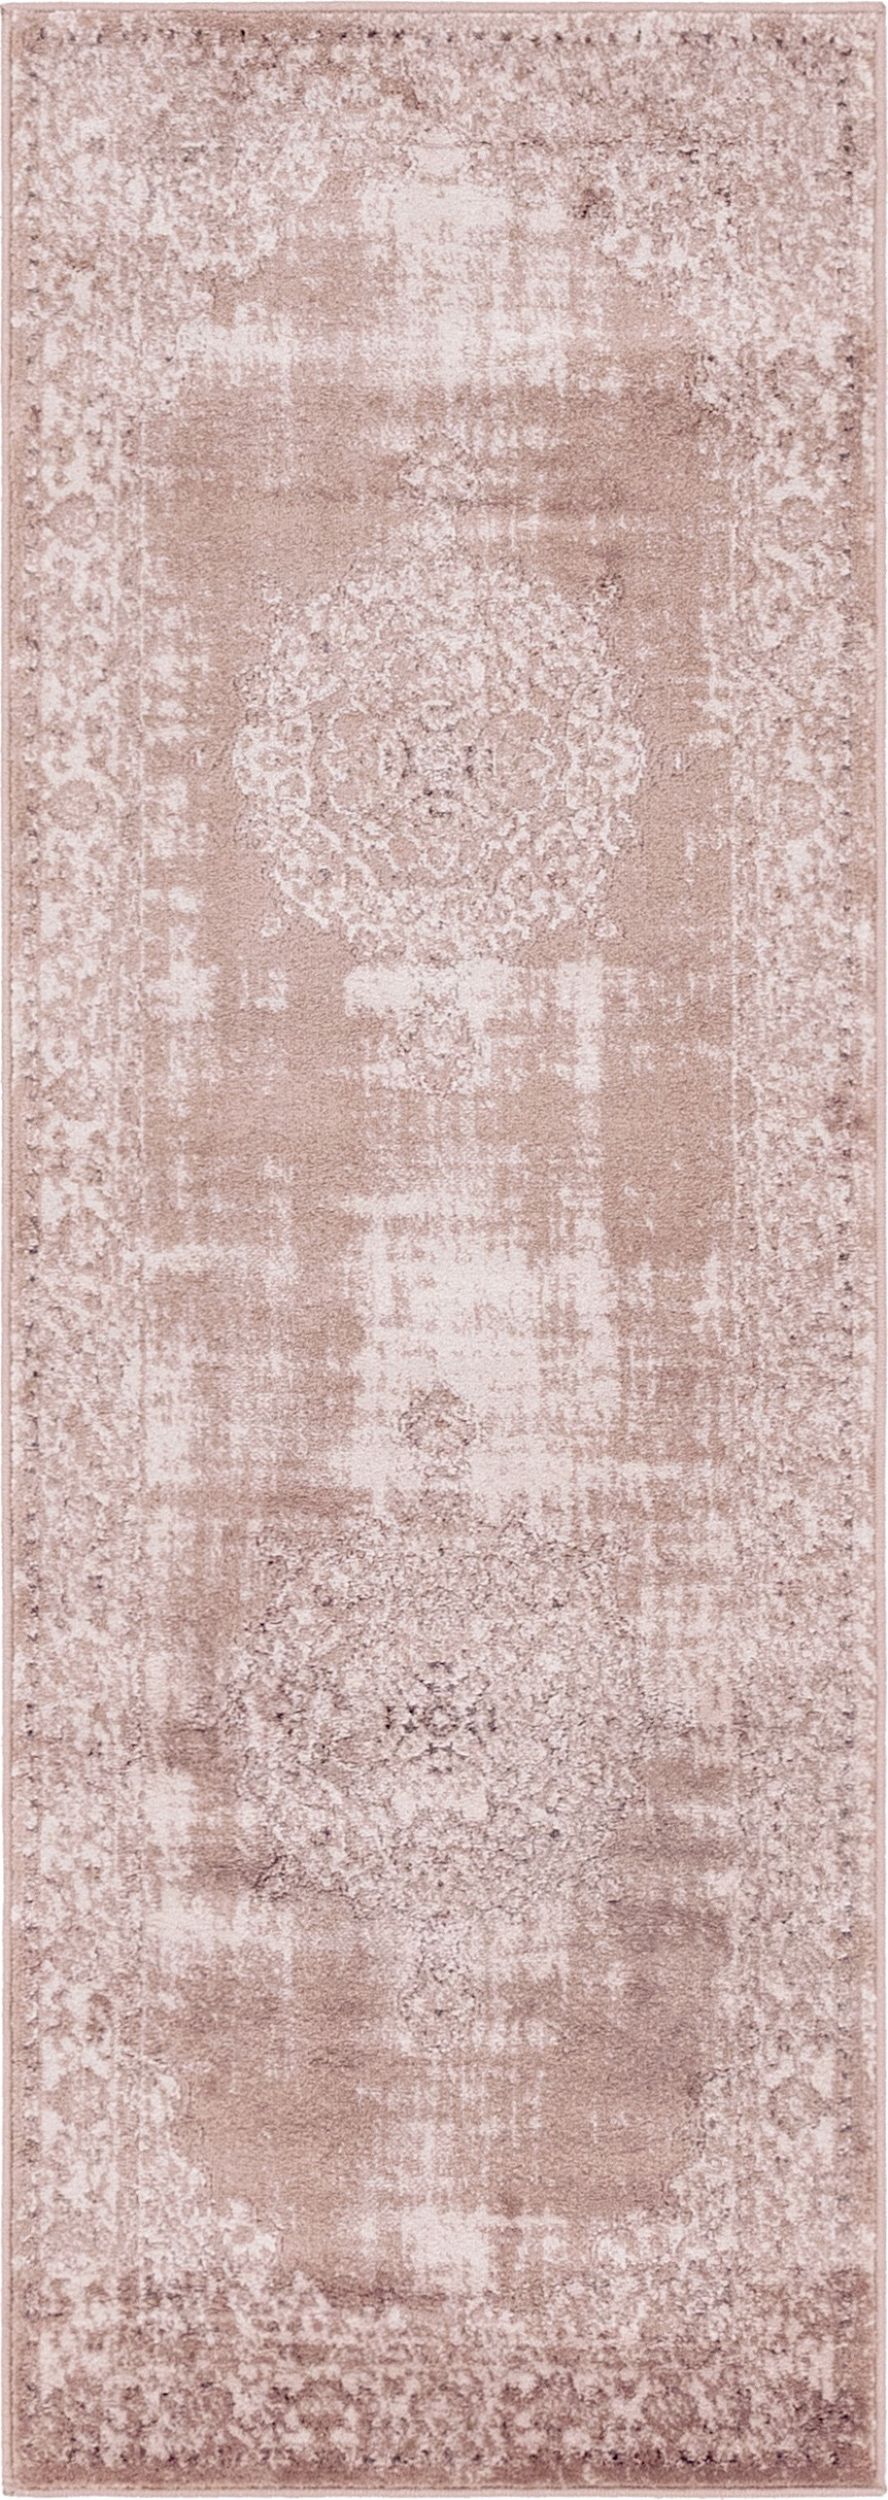 rugpal chelsea transitional area rug collection